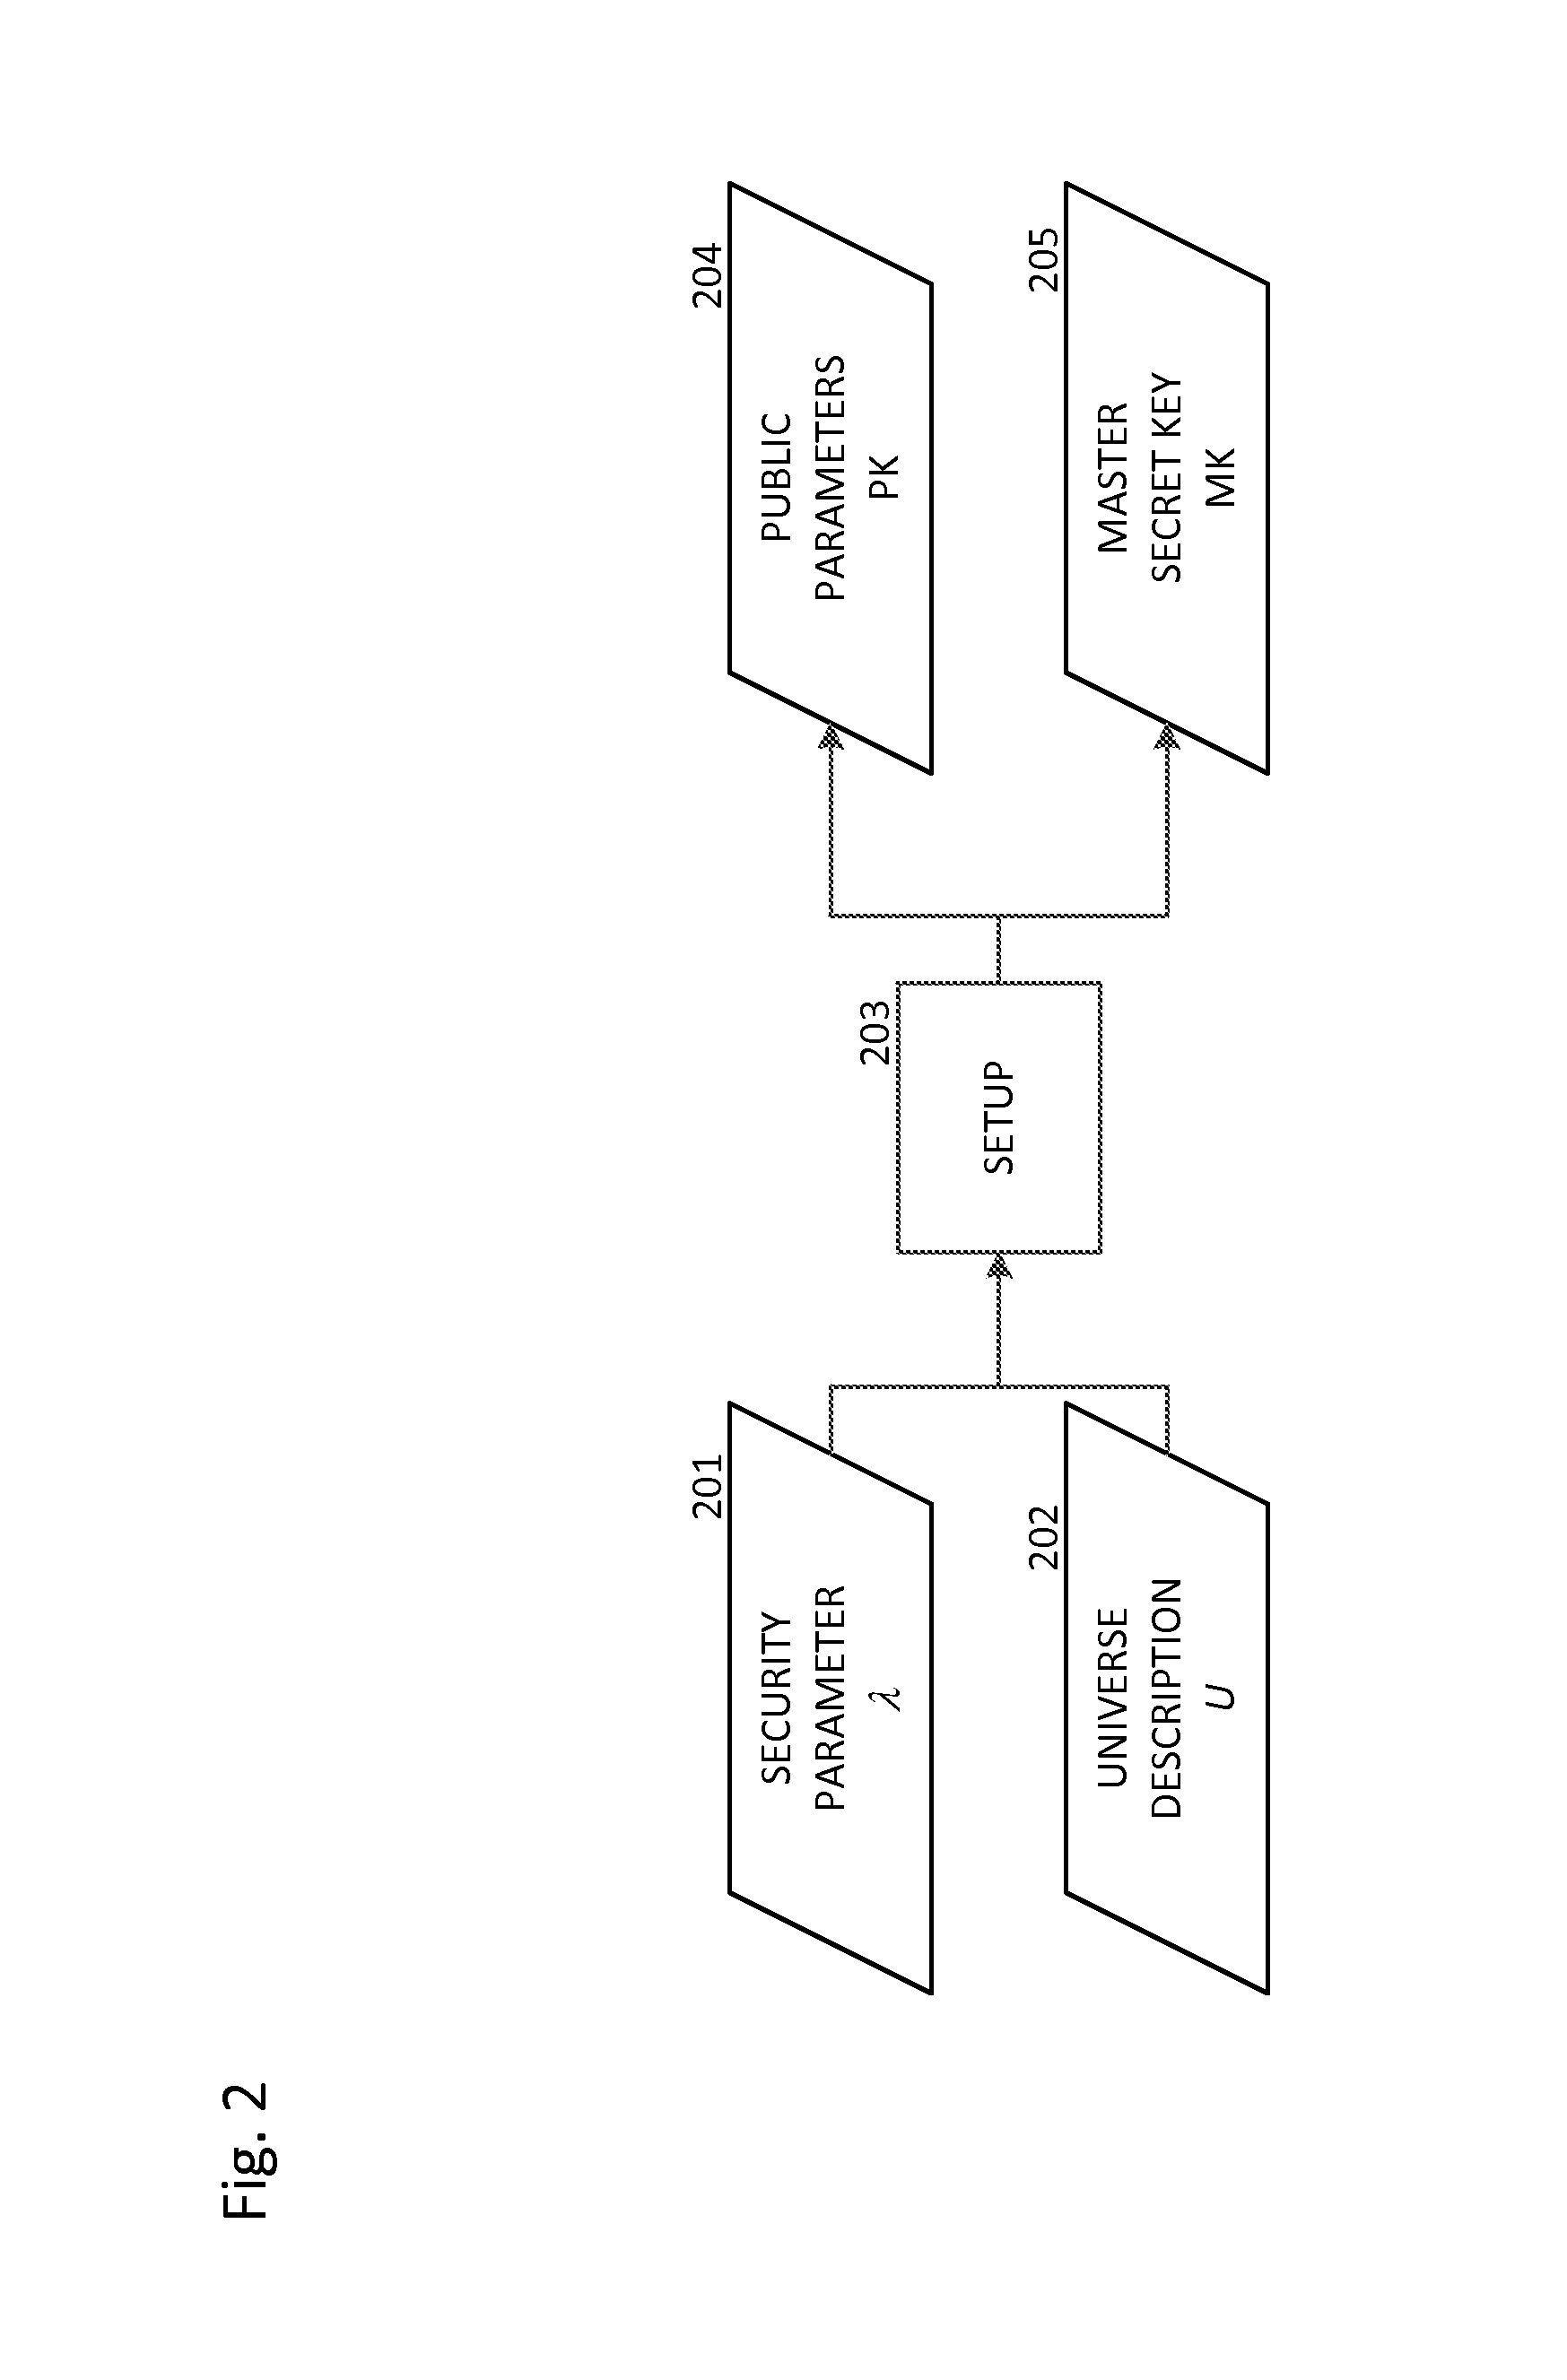 Systems and methods for efficient decryption of attribute-based encryption